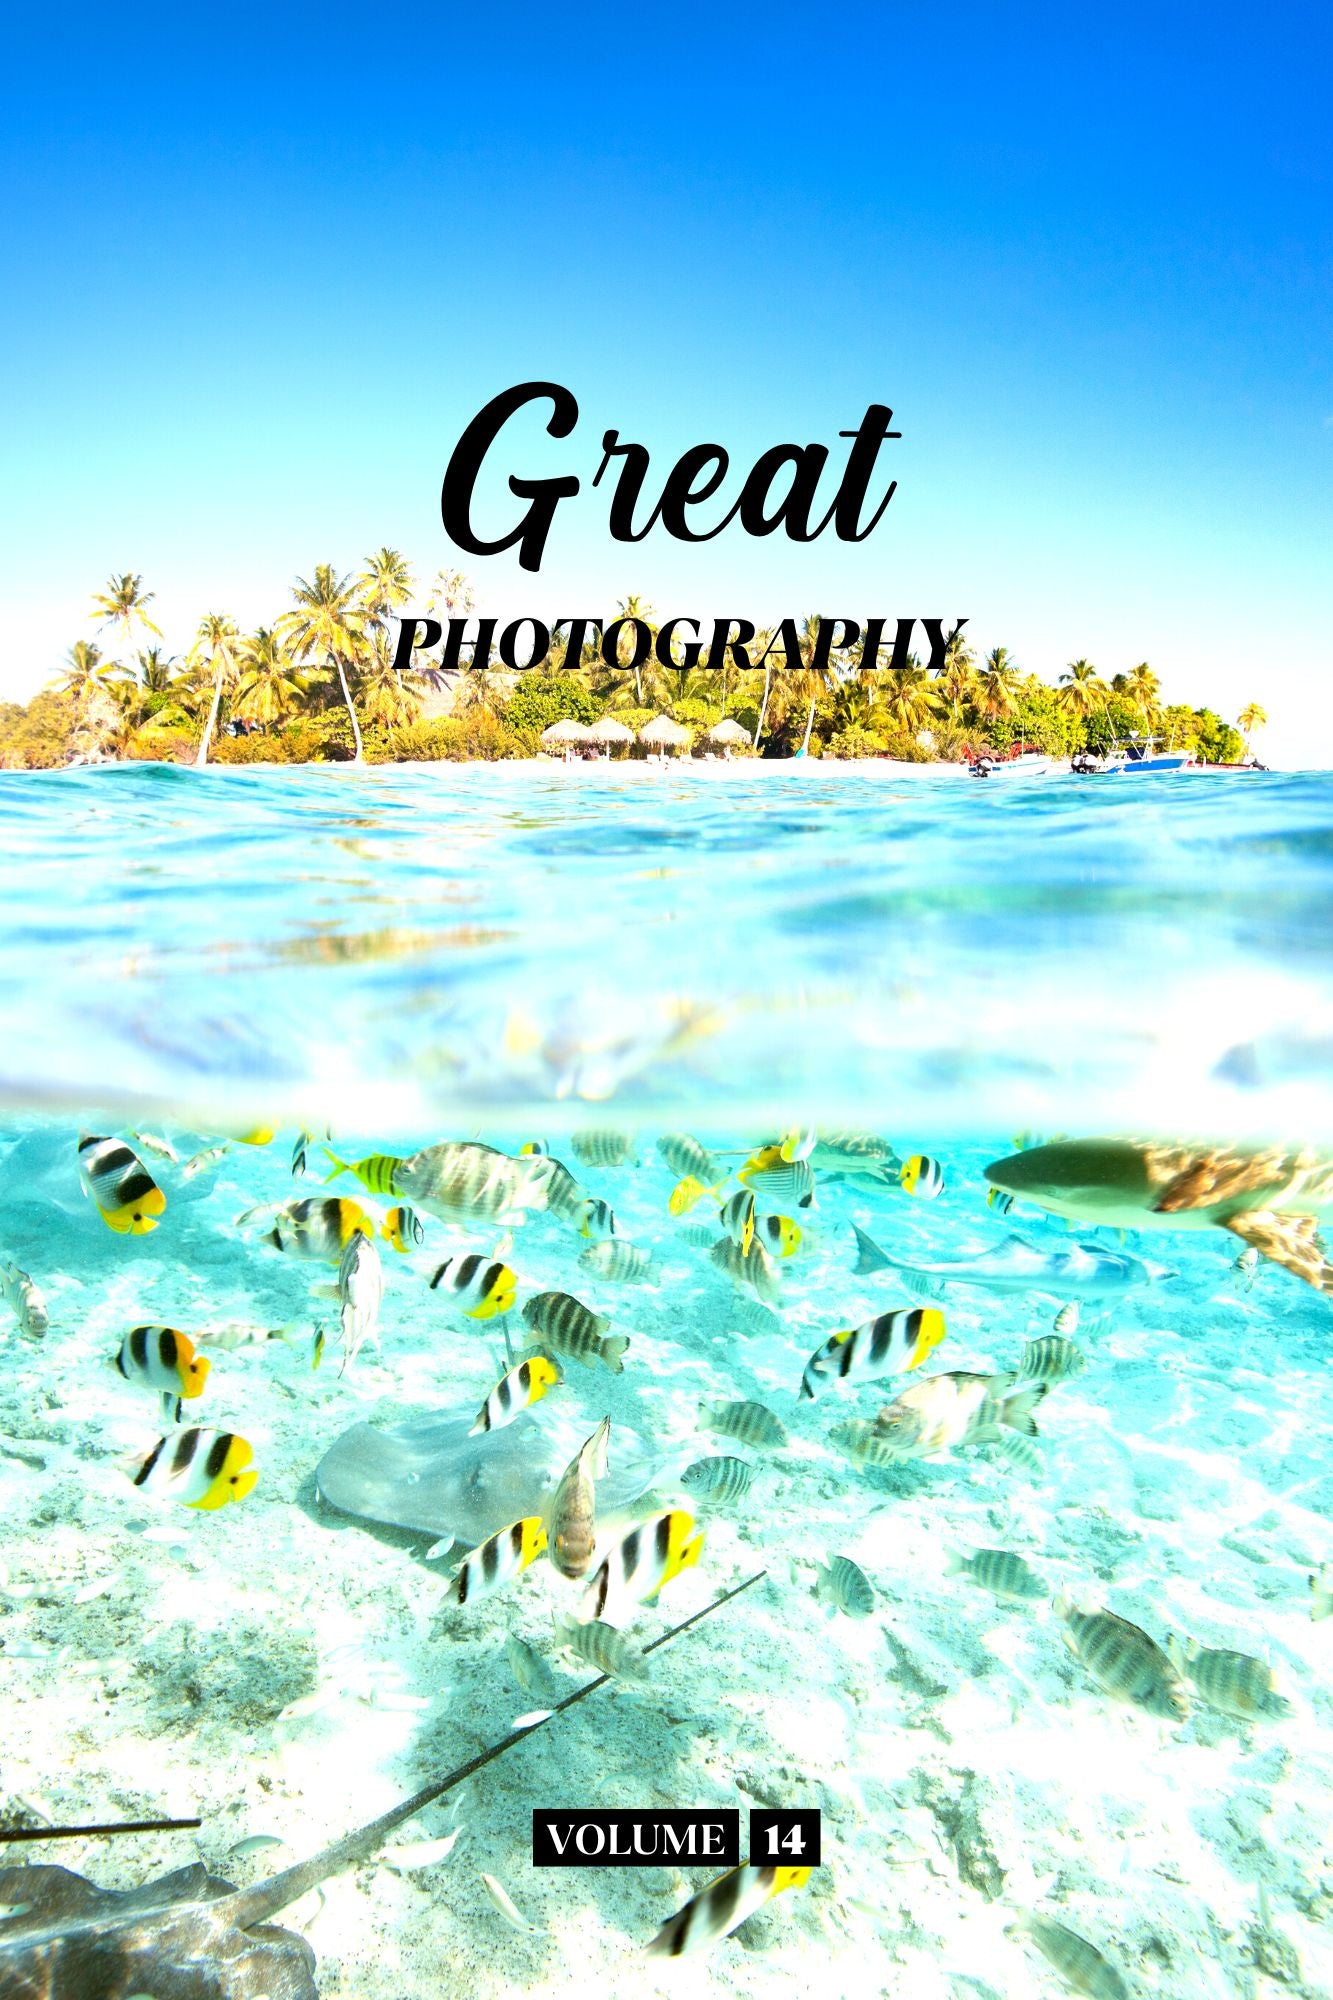 Great Photography Volume 14 (Physical Book)